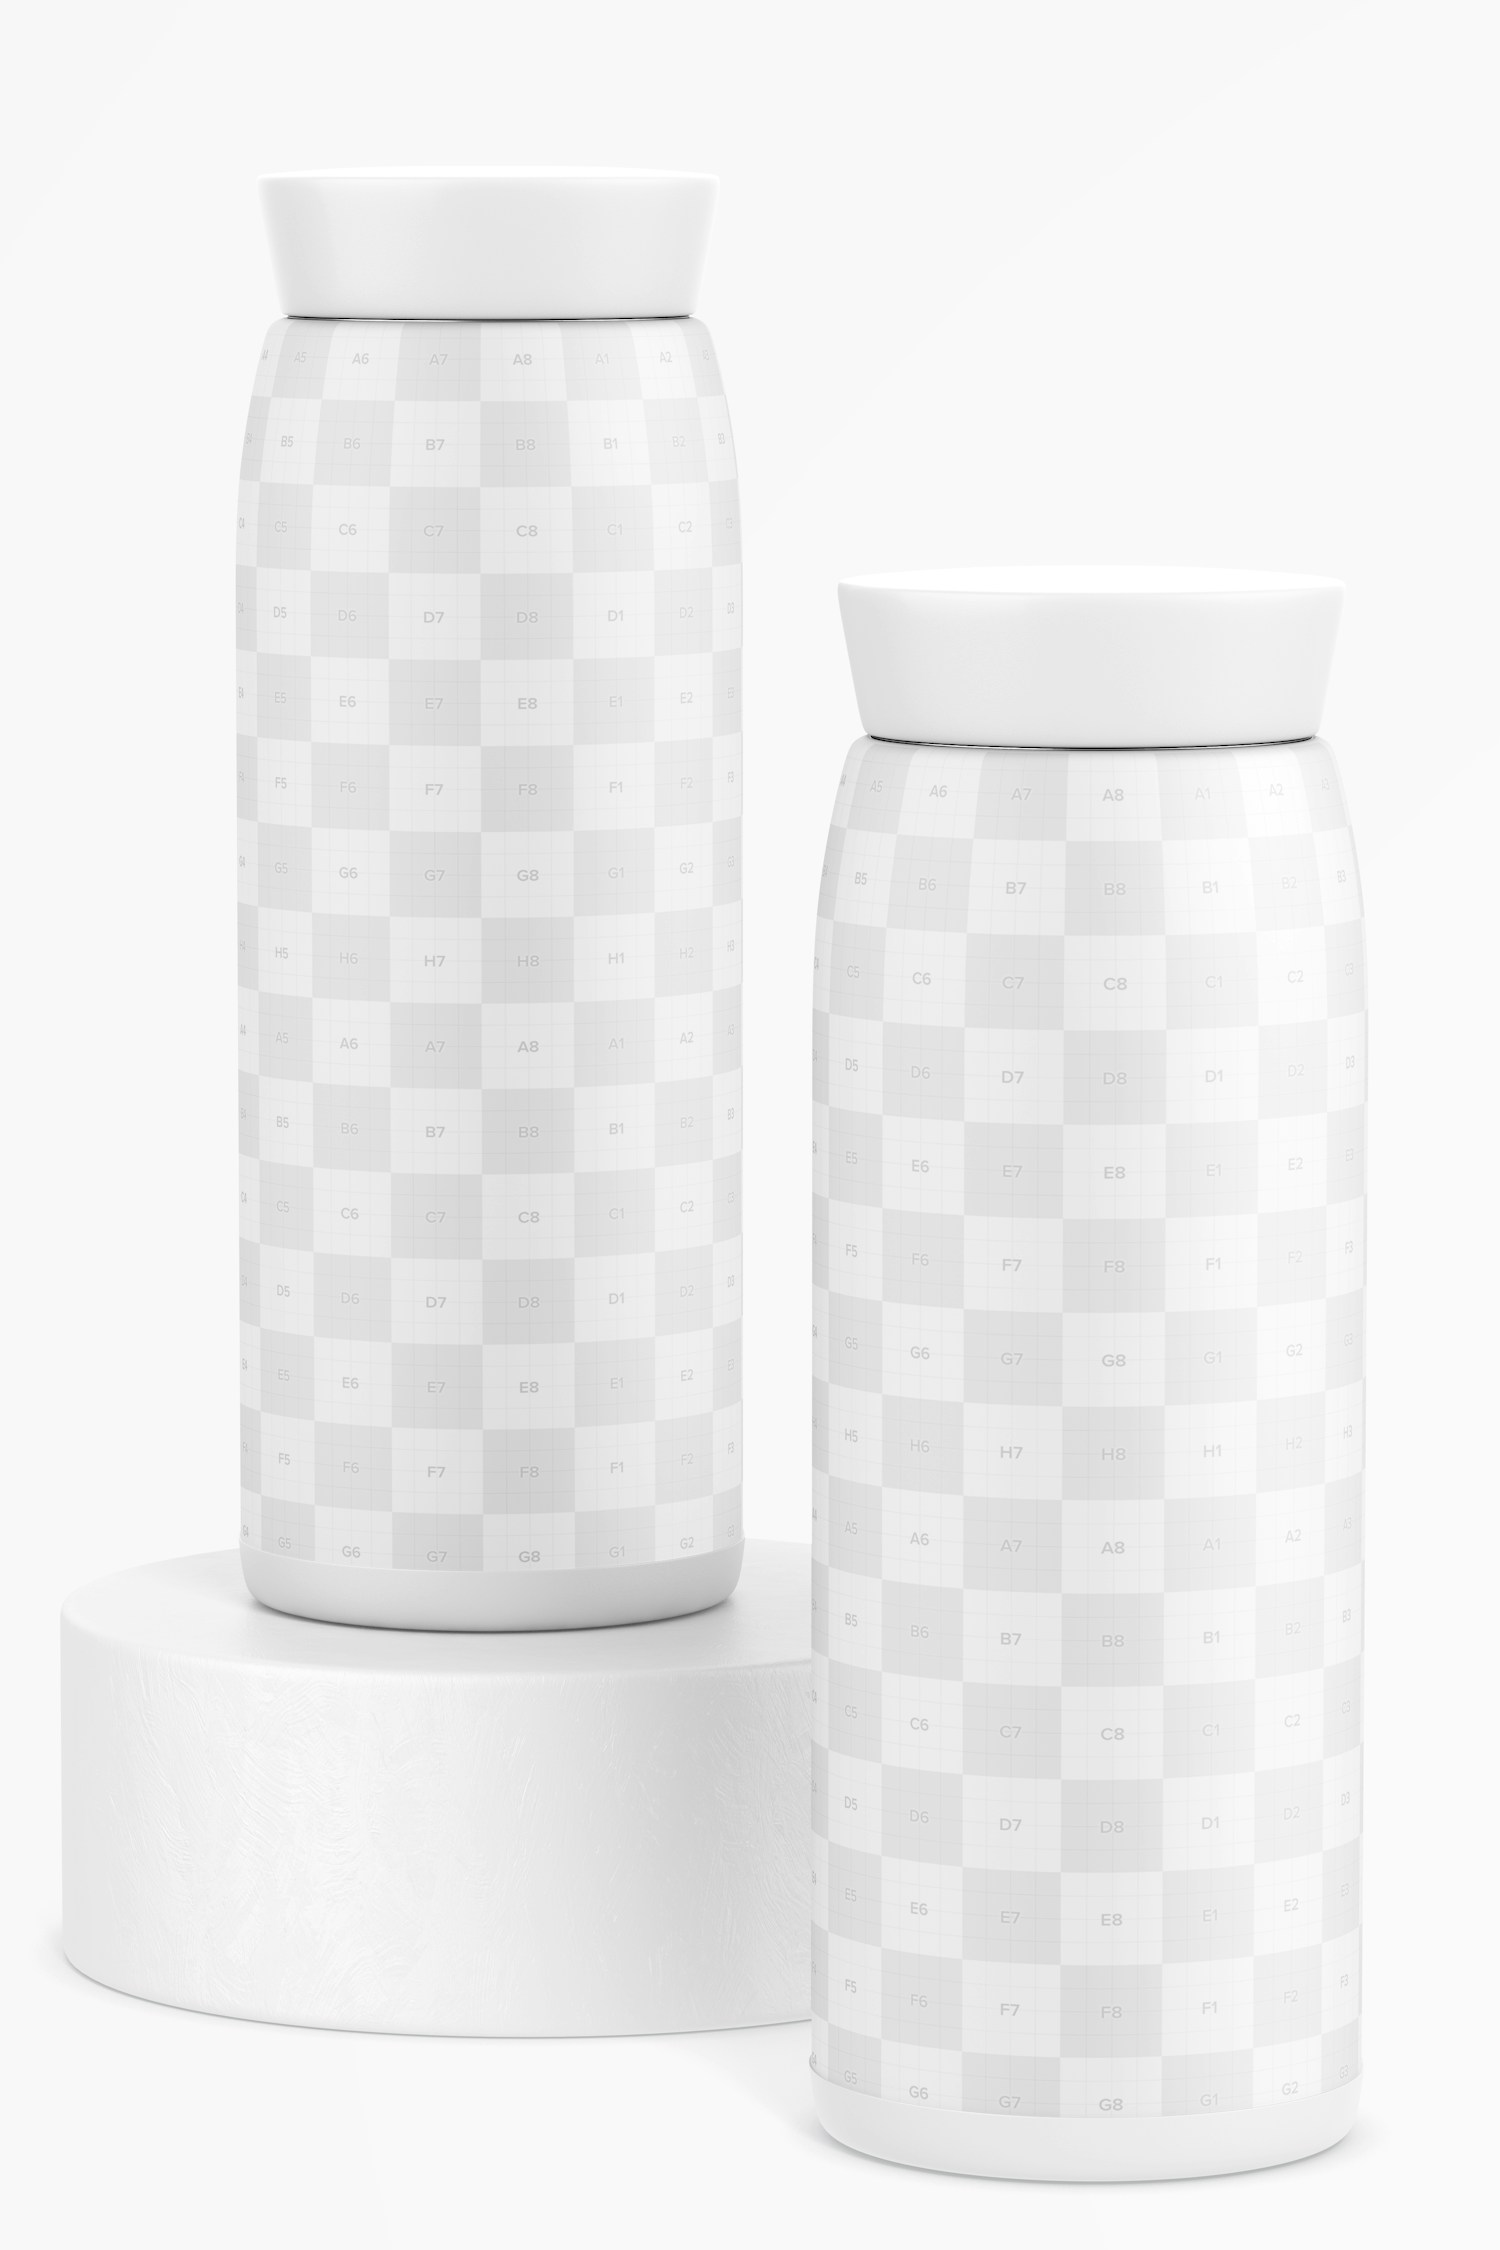 Metallic Thermos Mockup, Up and Down